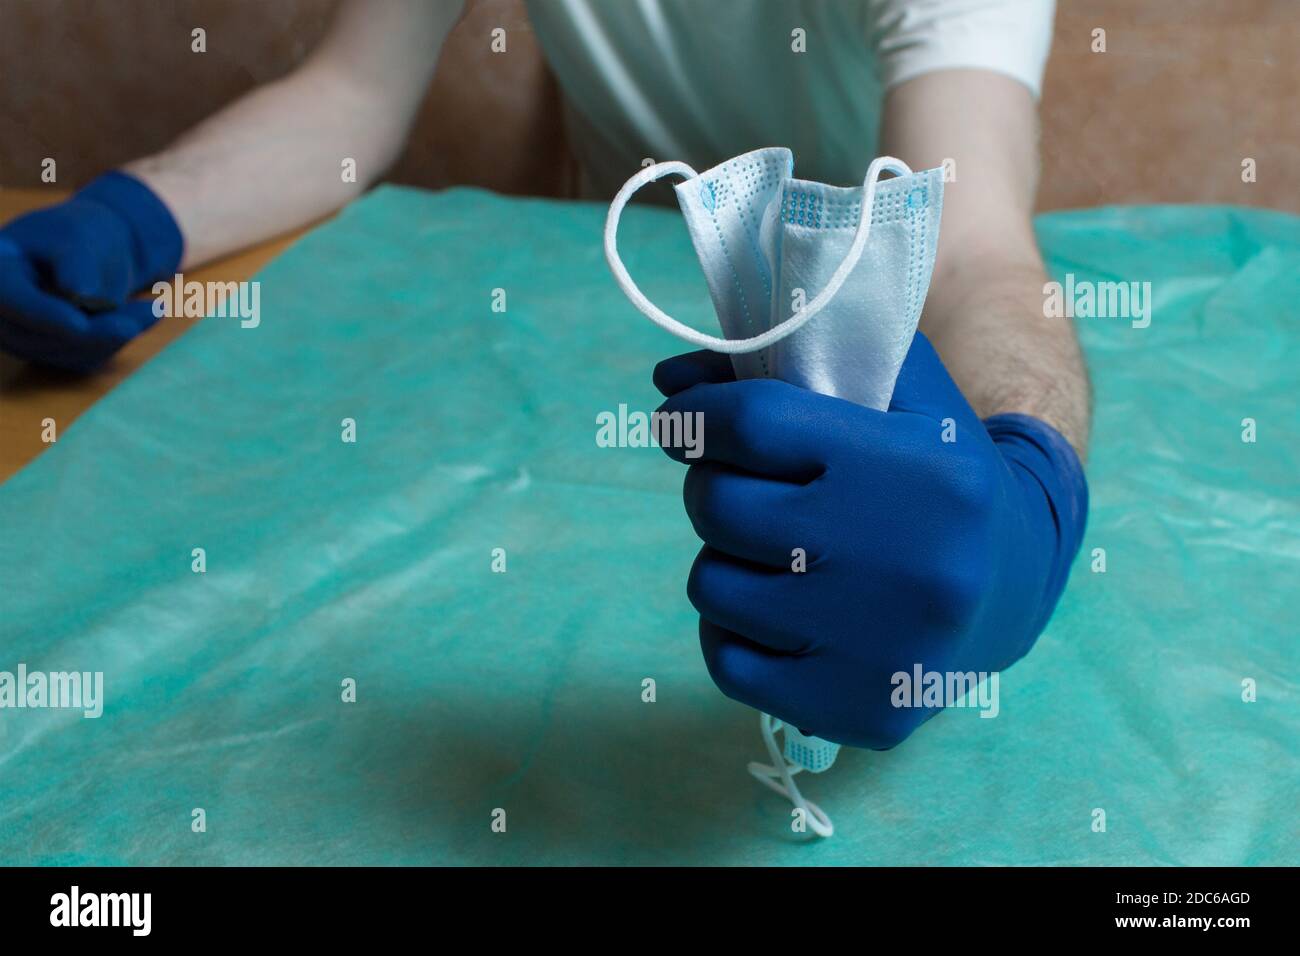 A closed fist protected with blue gloves squeezes a surgical mask. Health care and surgical concept. Personal protective equipment in healthcare. Stock Photo